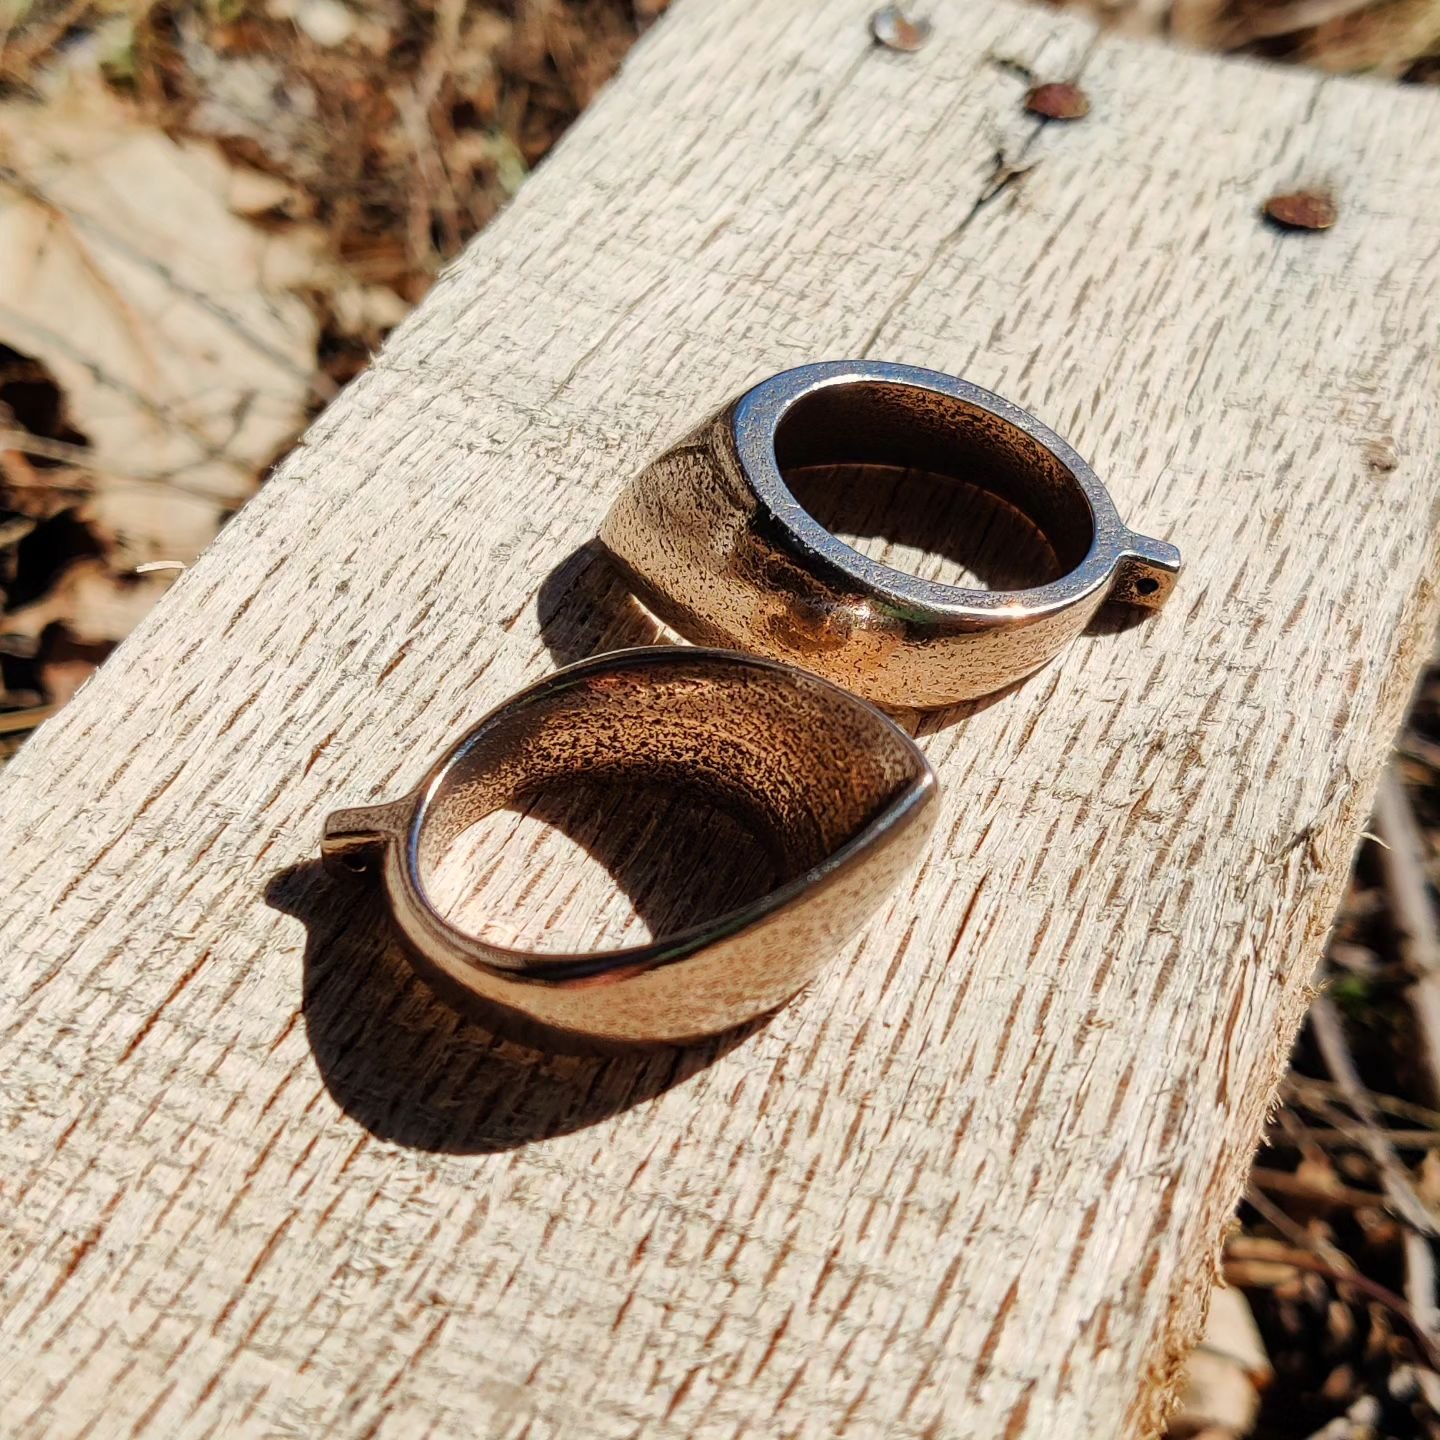 Some custom designed stainless Turkish rings with additional retention tabs.
.
.
.
#customthumbrings #horsebow #traditionalarchery #archerythumbring #thumbring #zihgir #thumbrelease #ottomanarchery #turkisharchery #thumbdraw #compositebow #turkokculu